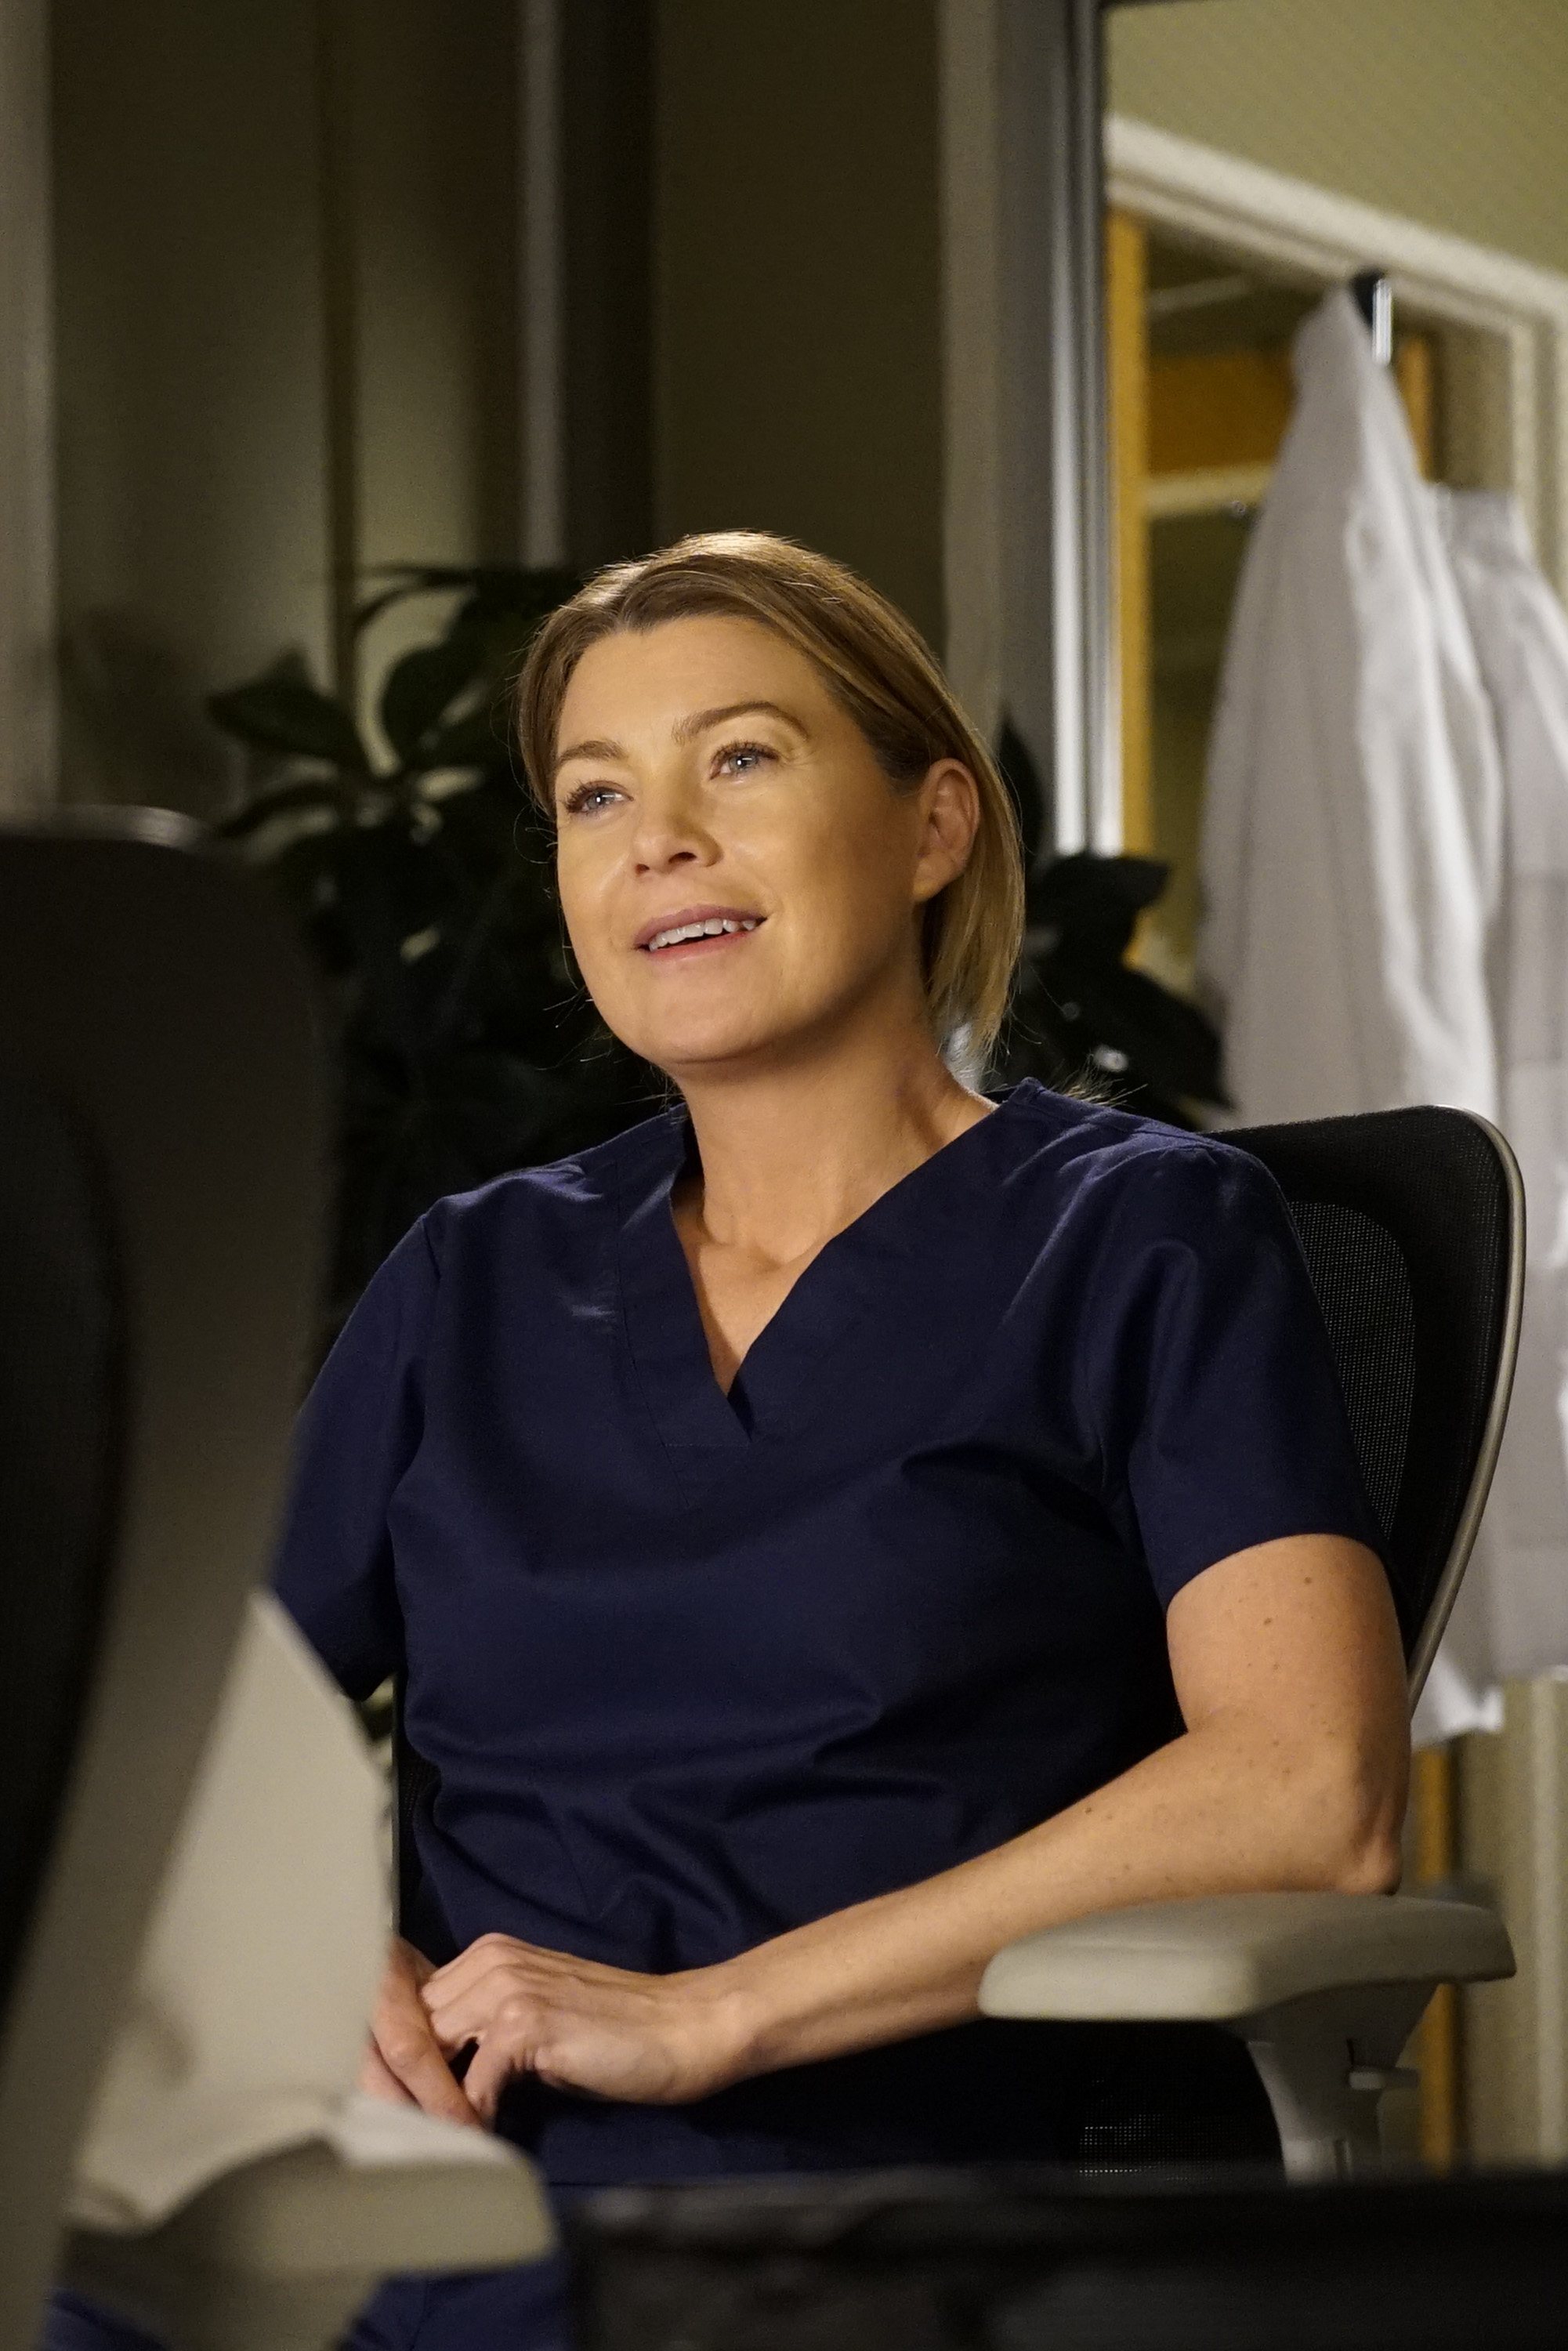 GREY'S ANATOMY - "At Last" - Owen and Amelia take their relationship to the next level; Alex gains some clarity on his future with Jo; and Callie and Arizona continue to struggle with the current custody arrangement, on "Grey's Anatomy," THURSDAY, MAY 12 (8:00-9:00 p.m. EDT), on the ABC Television Network. (ABC/Kelsey McNeal) ELLEN POMPEO